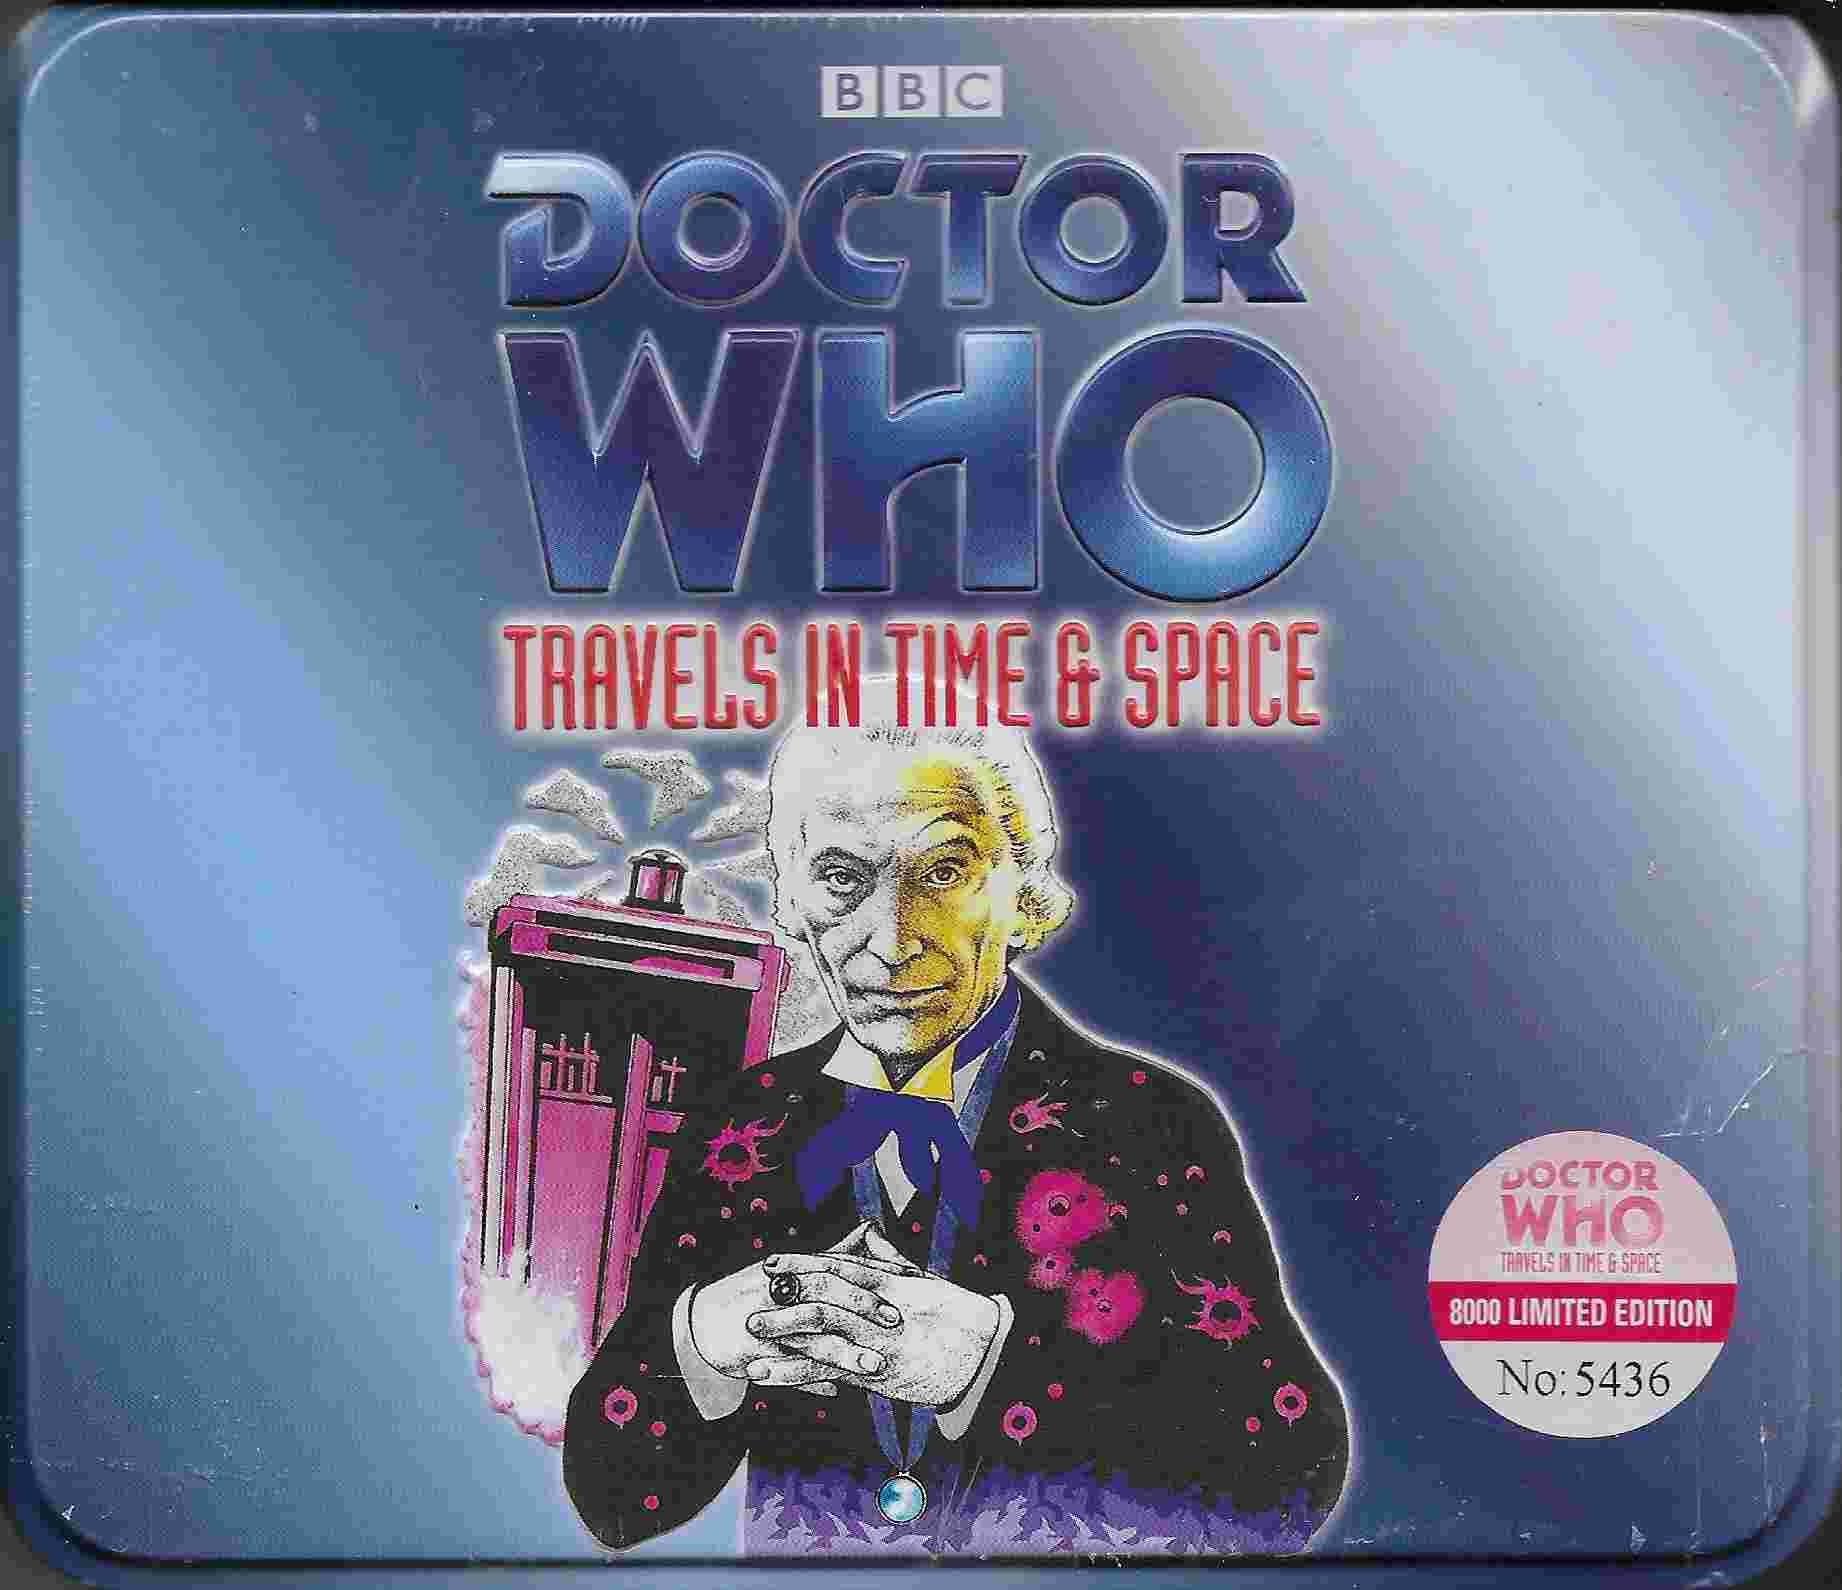 Picture of ISBN 0-563-50424-2 Doctor Who - Travels in time \& space by artist David Whitaker / BillStrutton from the BBC records and Tapes library